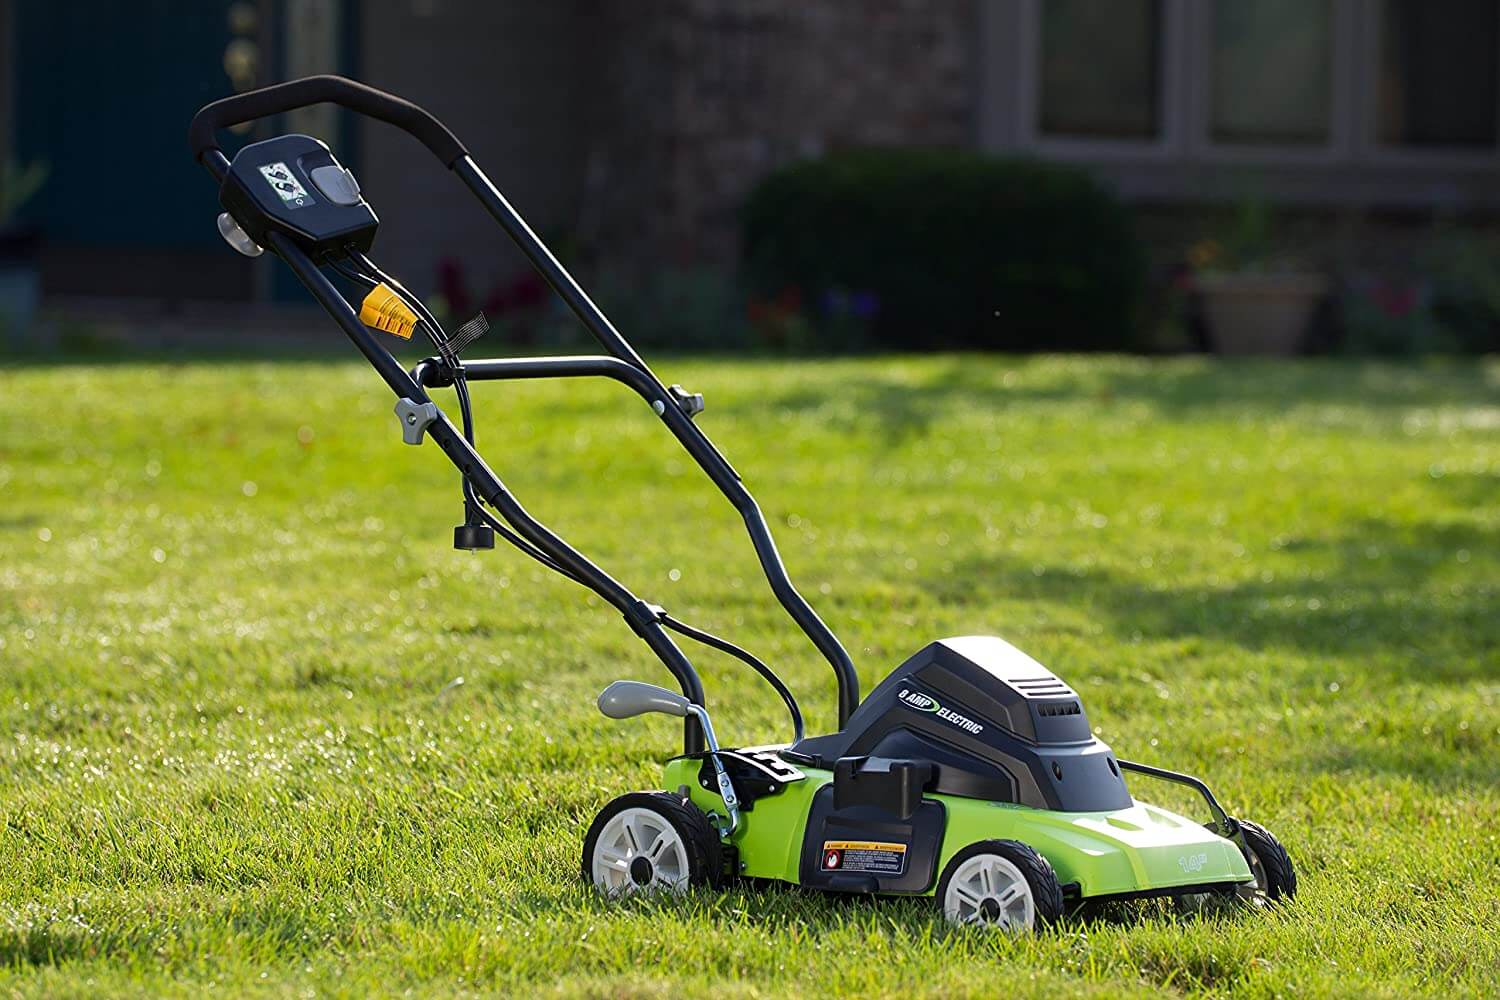 Causes Of Lawn Mowers On Fire Lawn Mower Safety Tips For You